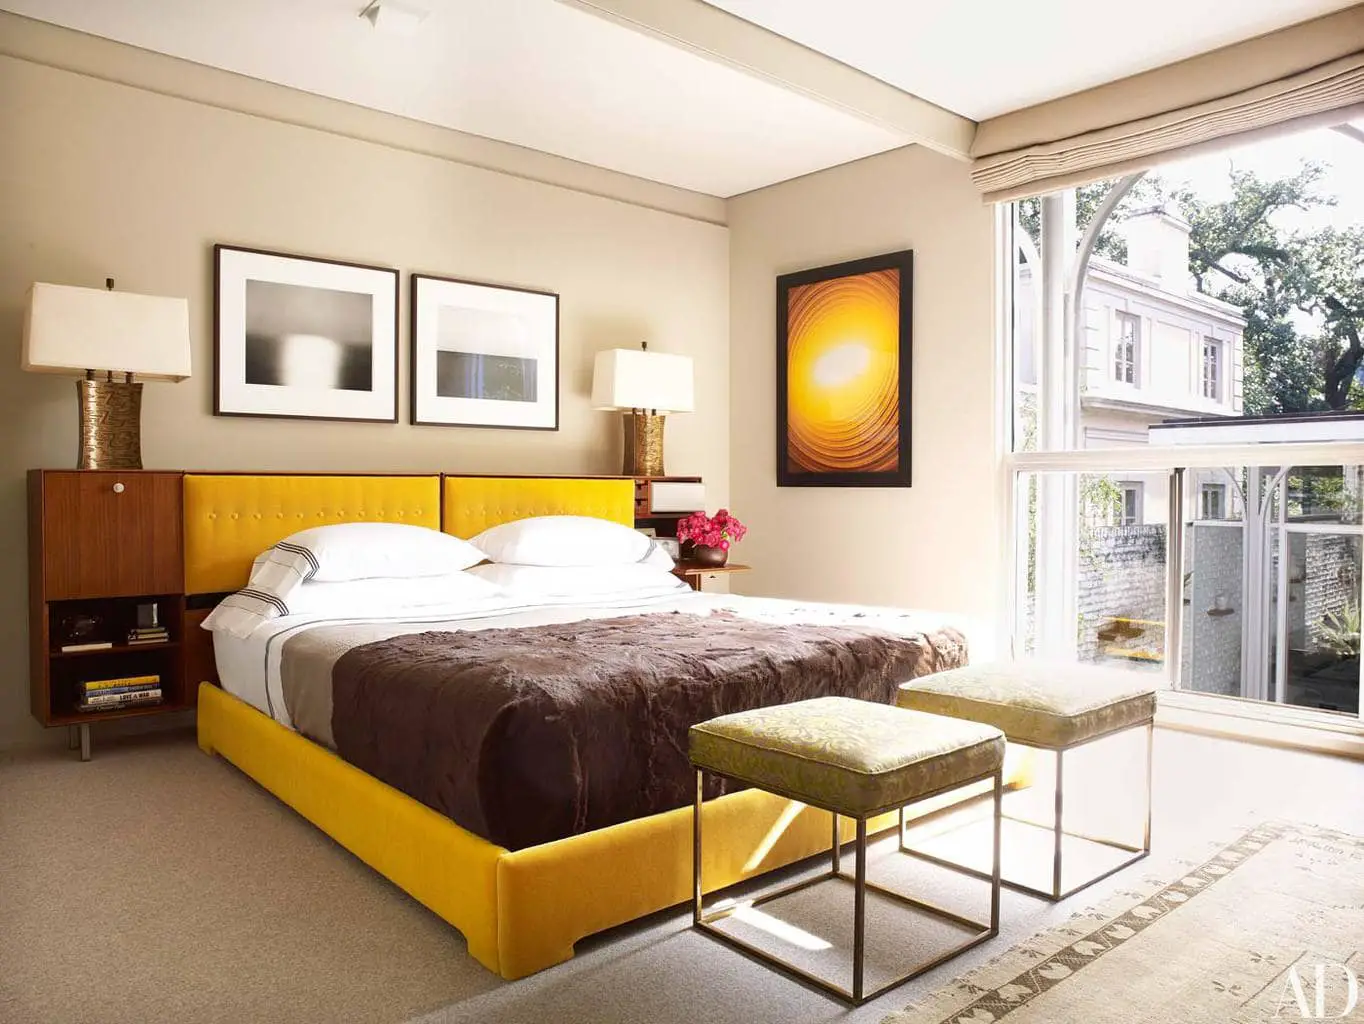 Bedroom in modernist New Orleans home via @thouswellblog